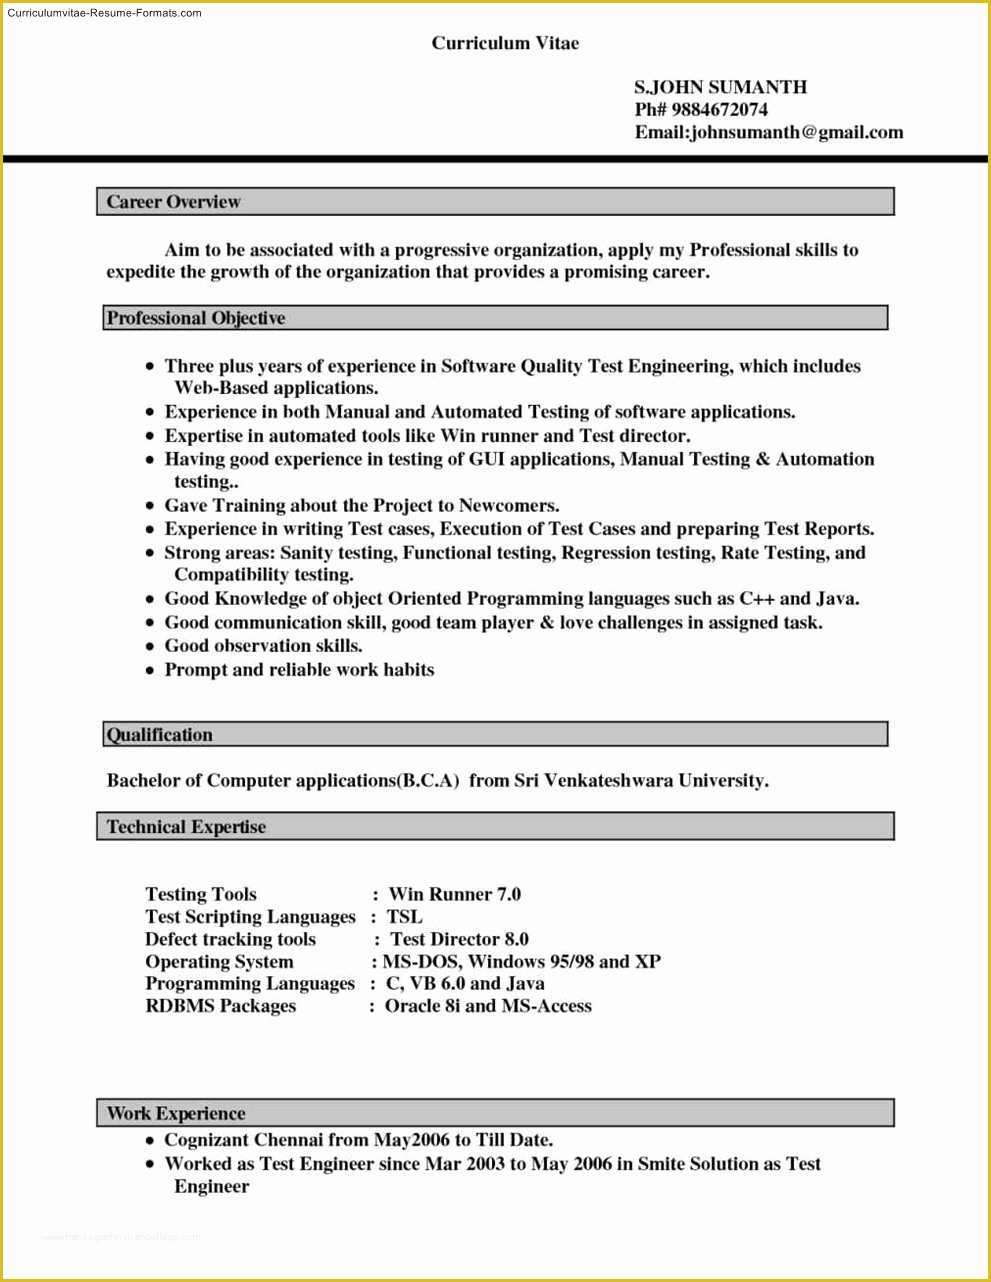 Free Ms Word Resume Templates Of Free Resume Templates for Microsoft Word 2007 Free